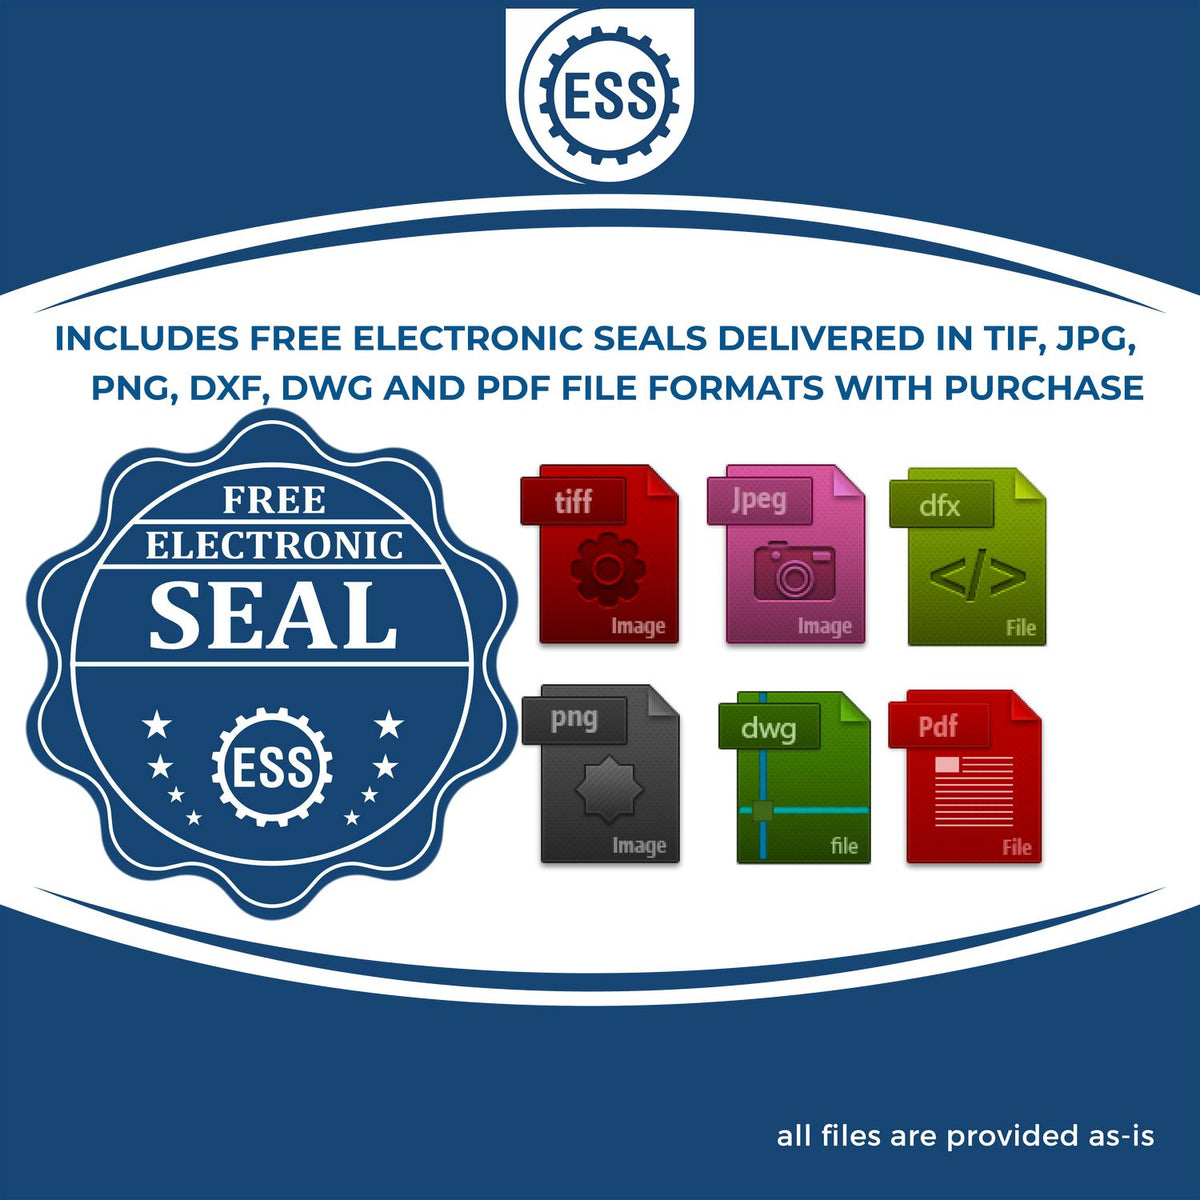 An infographic for the free electronic seal for the Heavy Duty Cast Iron Minnesota Engineer Seal Embosser illustrating the different file type icons such as DXF, DWG, TIF, JPG and PNG.